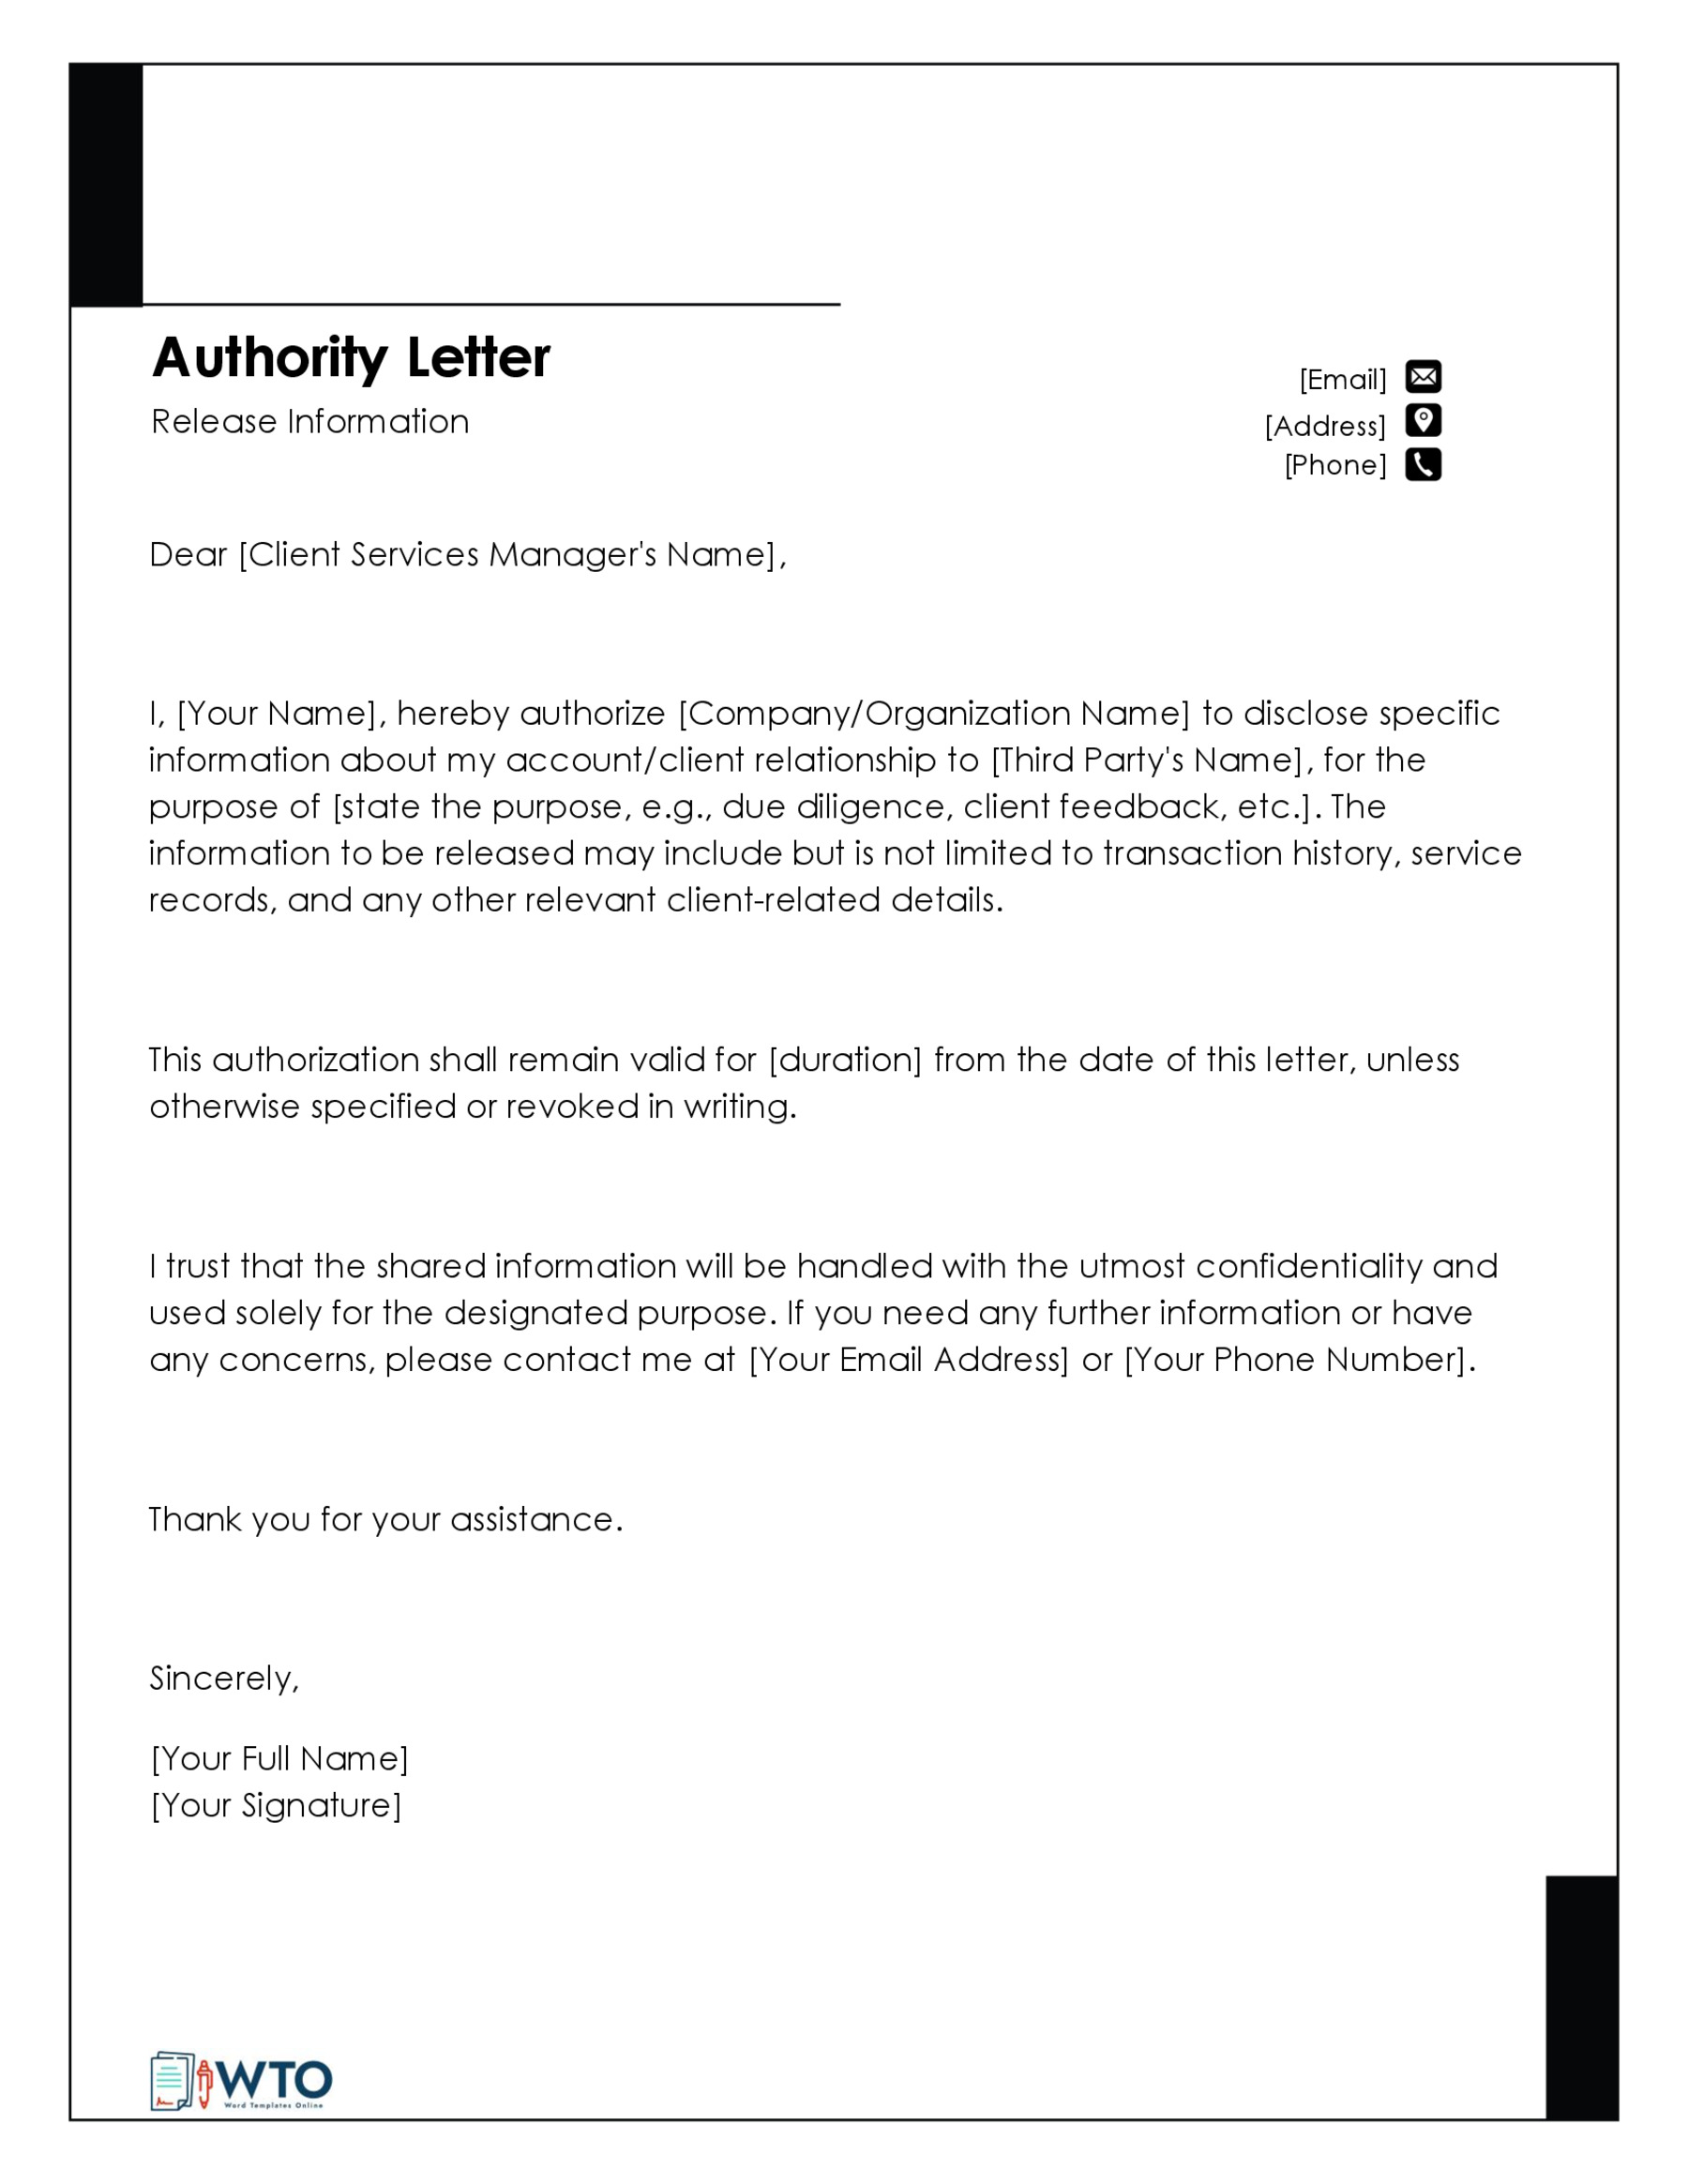 Authorization Letter to Release Information Template-Word Format